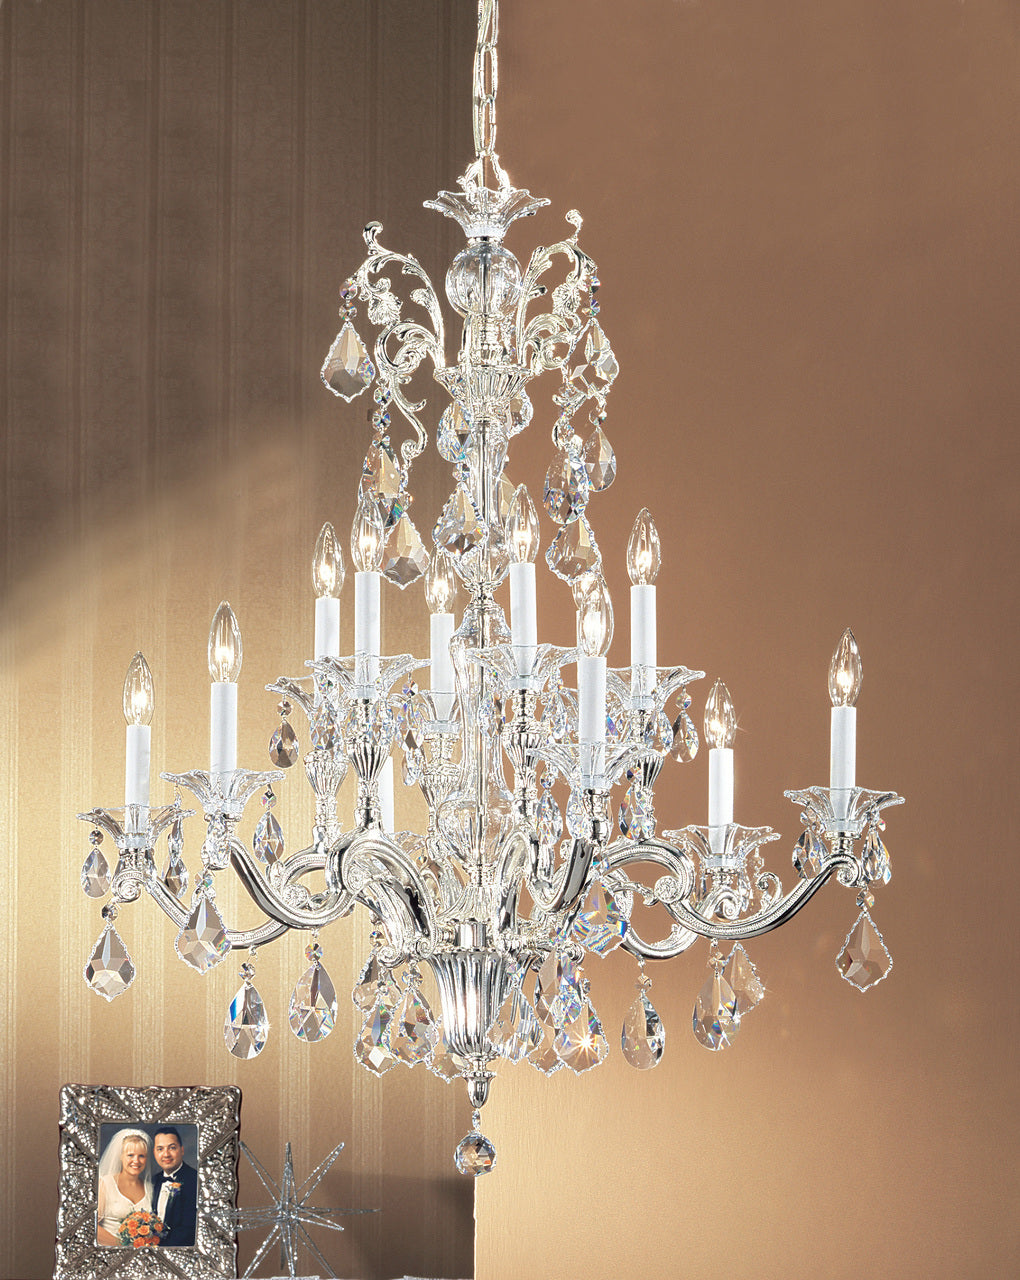 Classic Lighting 57112 SP S Via Firenze Crystal Chandelier in Silver (Imported from Spain)